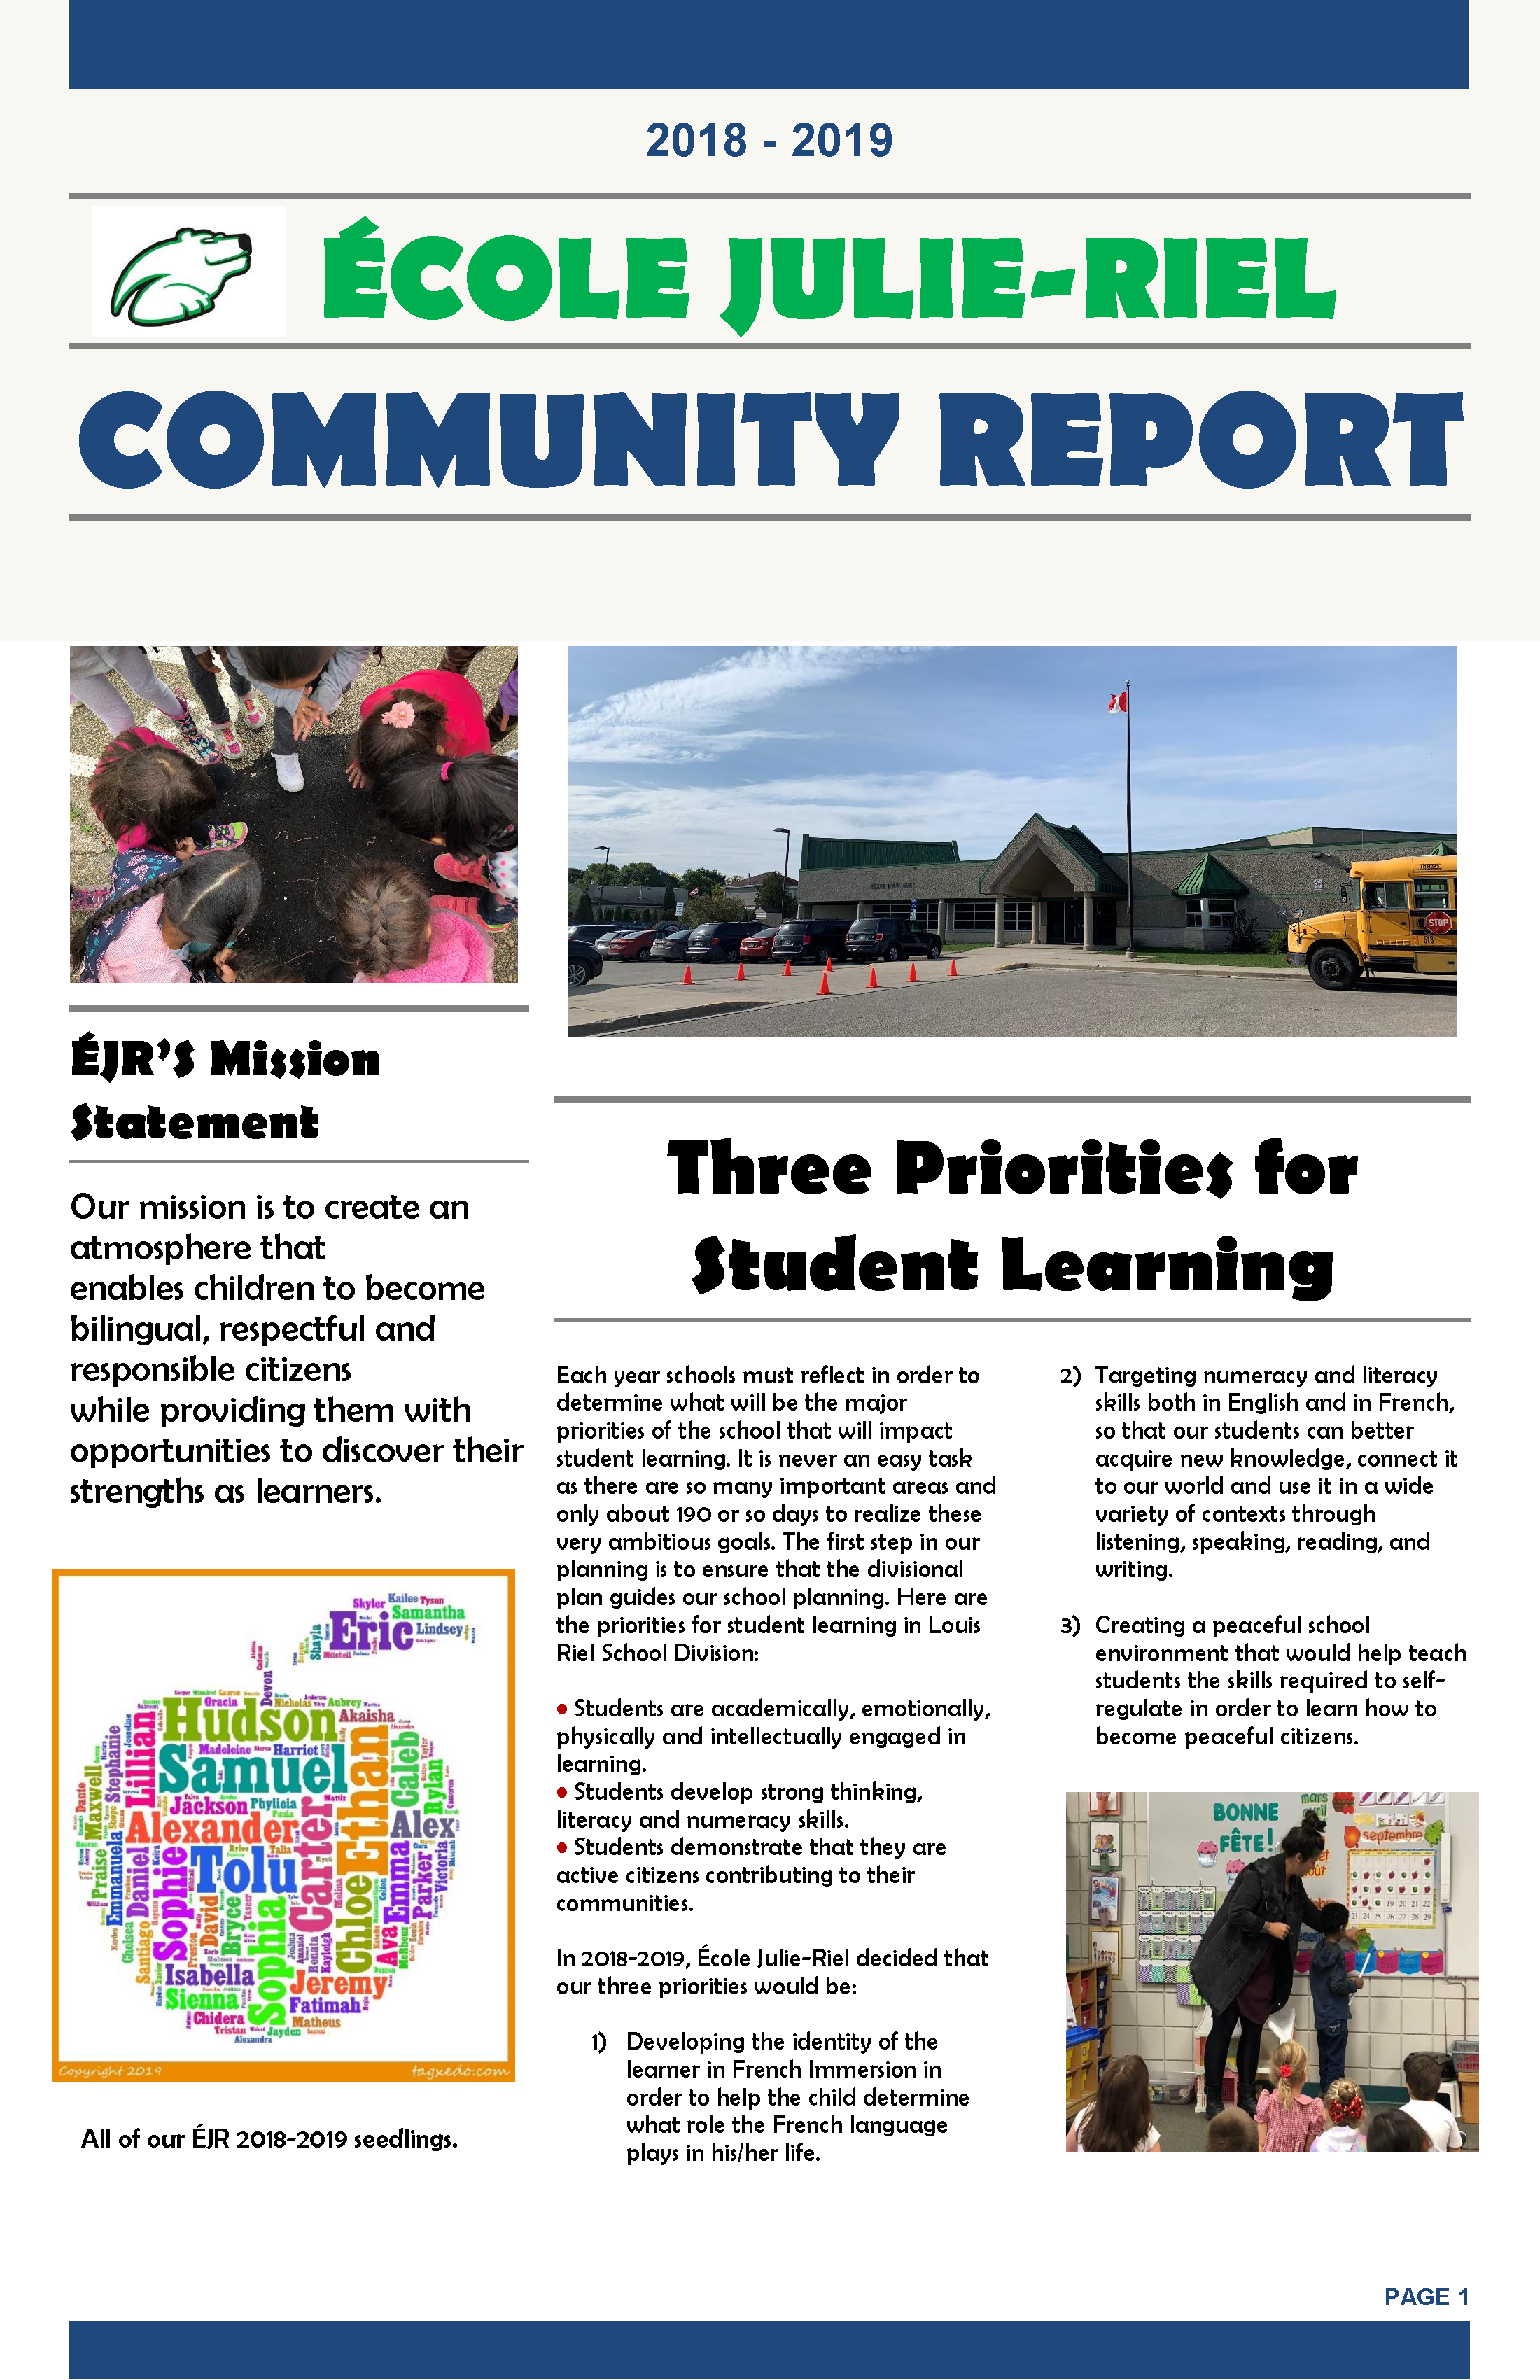 ÉJR Report to the Community FINAL 2019_Page_1.png